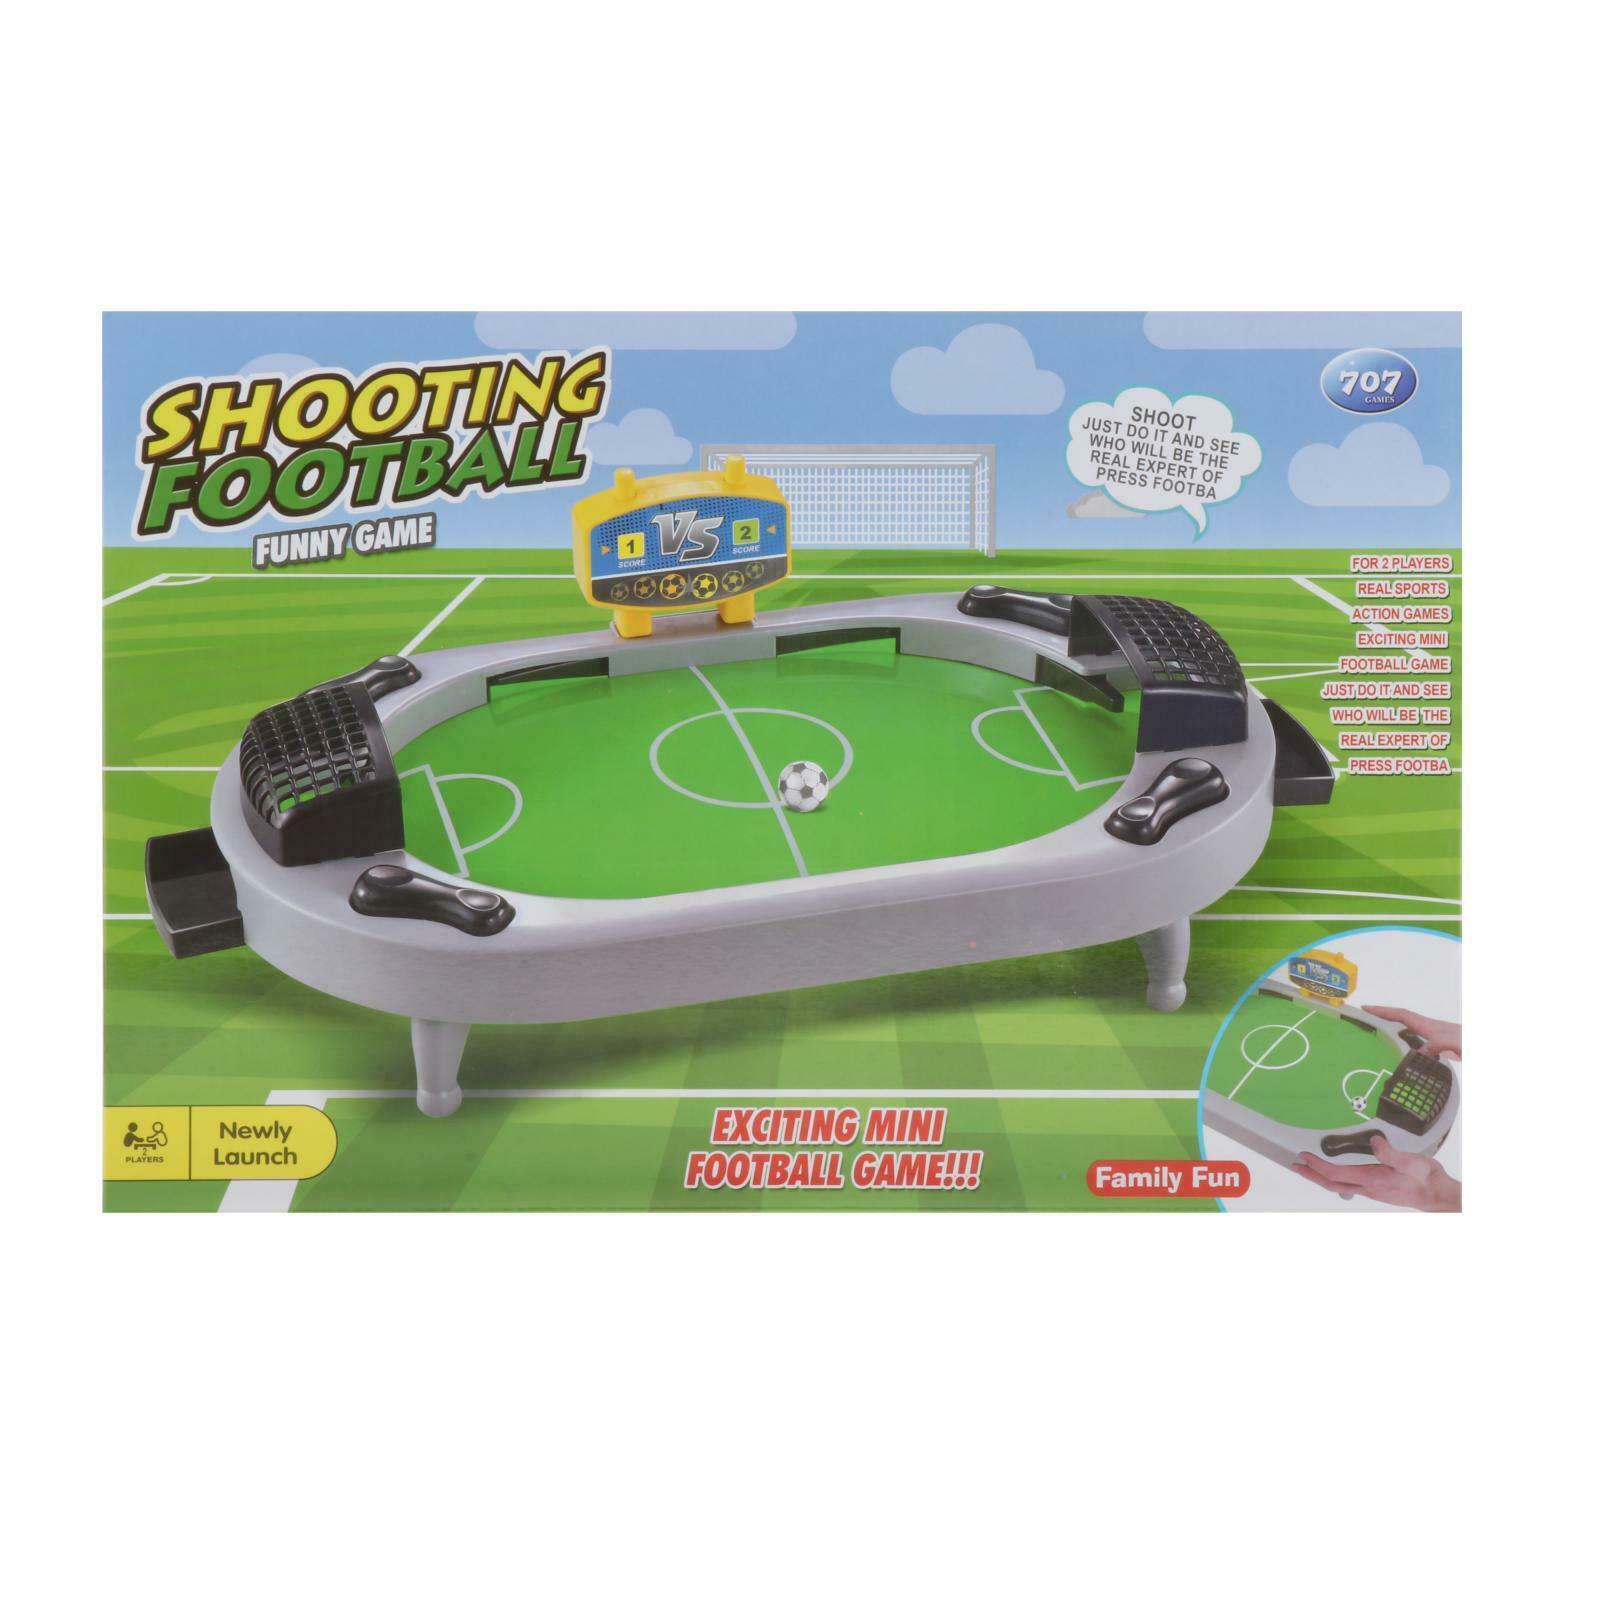 Mini Tabletop Soccer Machine Board Interactive Game Football Sport- 2 Players